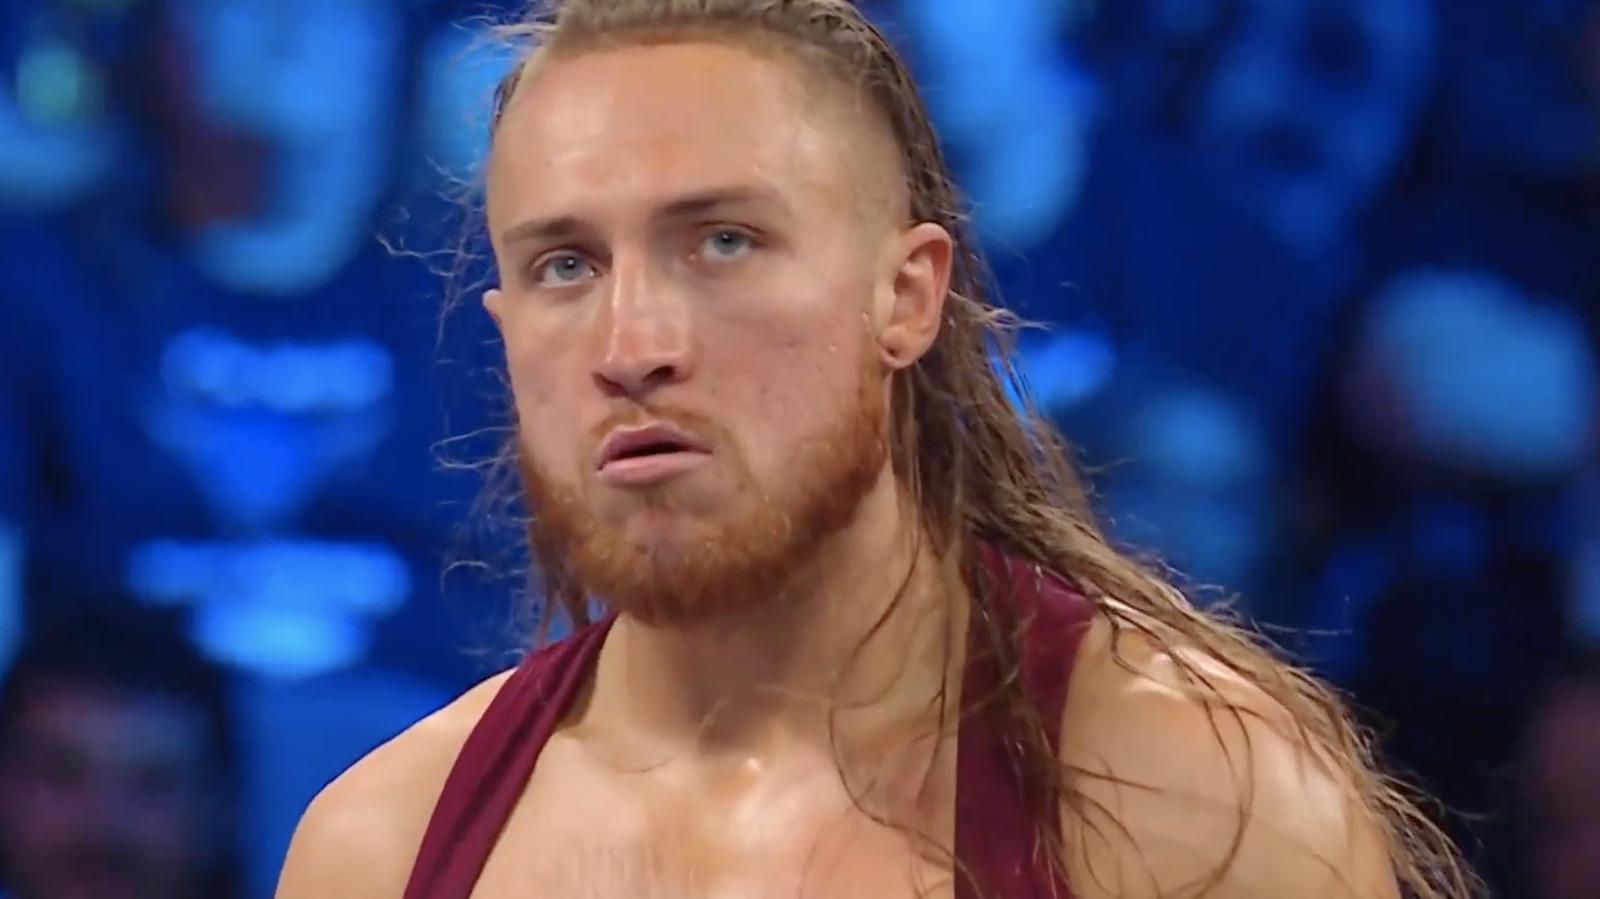 Butch No More: Pete Dunne Returns To Original Name And Presentation On WWE SmackDown